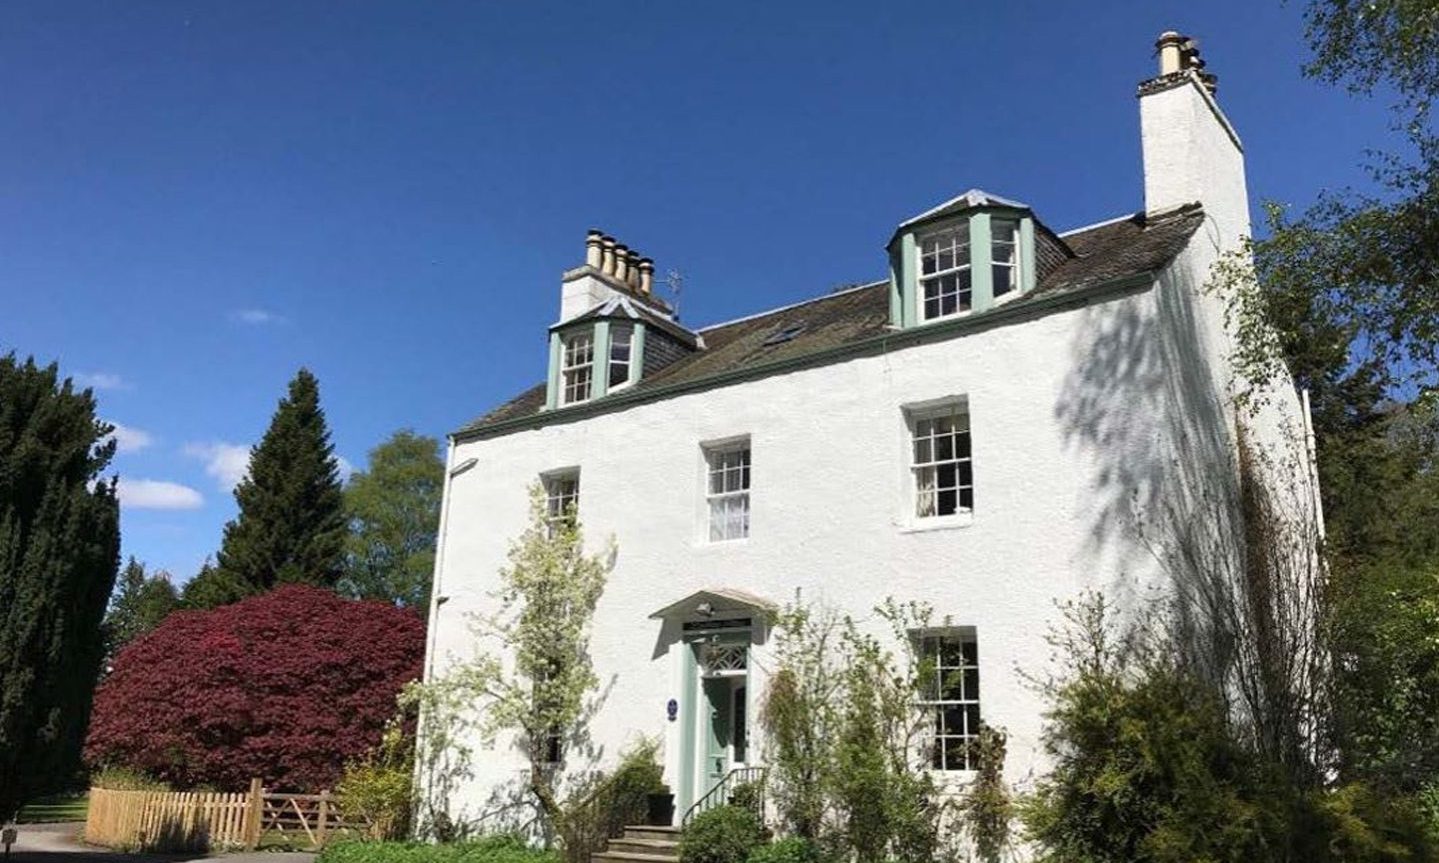 Dalshian House in Pitlochry.